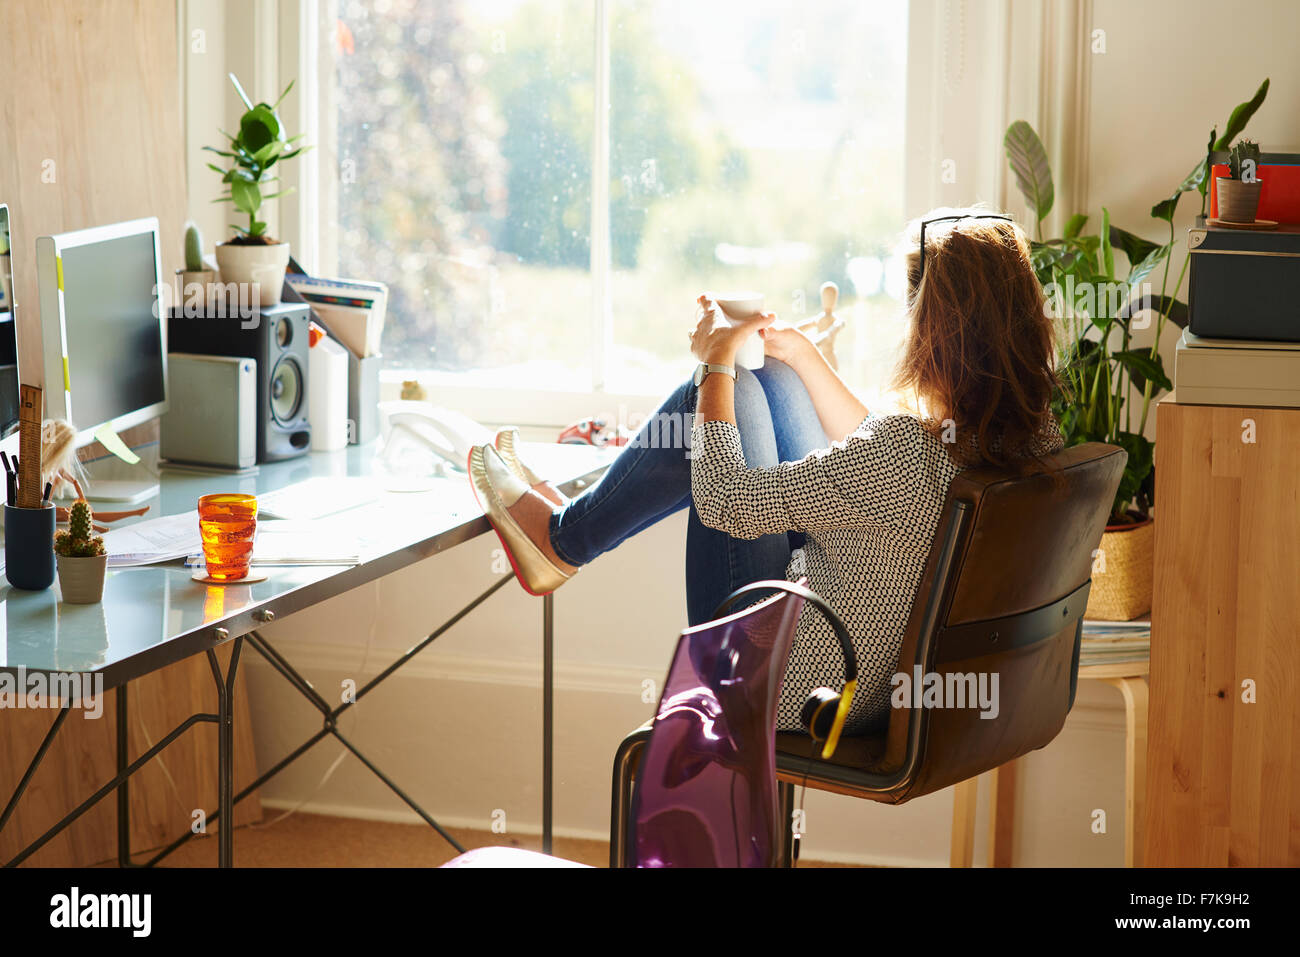 Pensive woman looking through window with feet up on desk in sunny home office Stock Photo